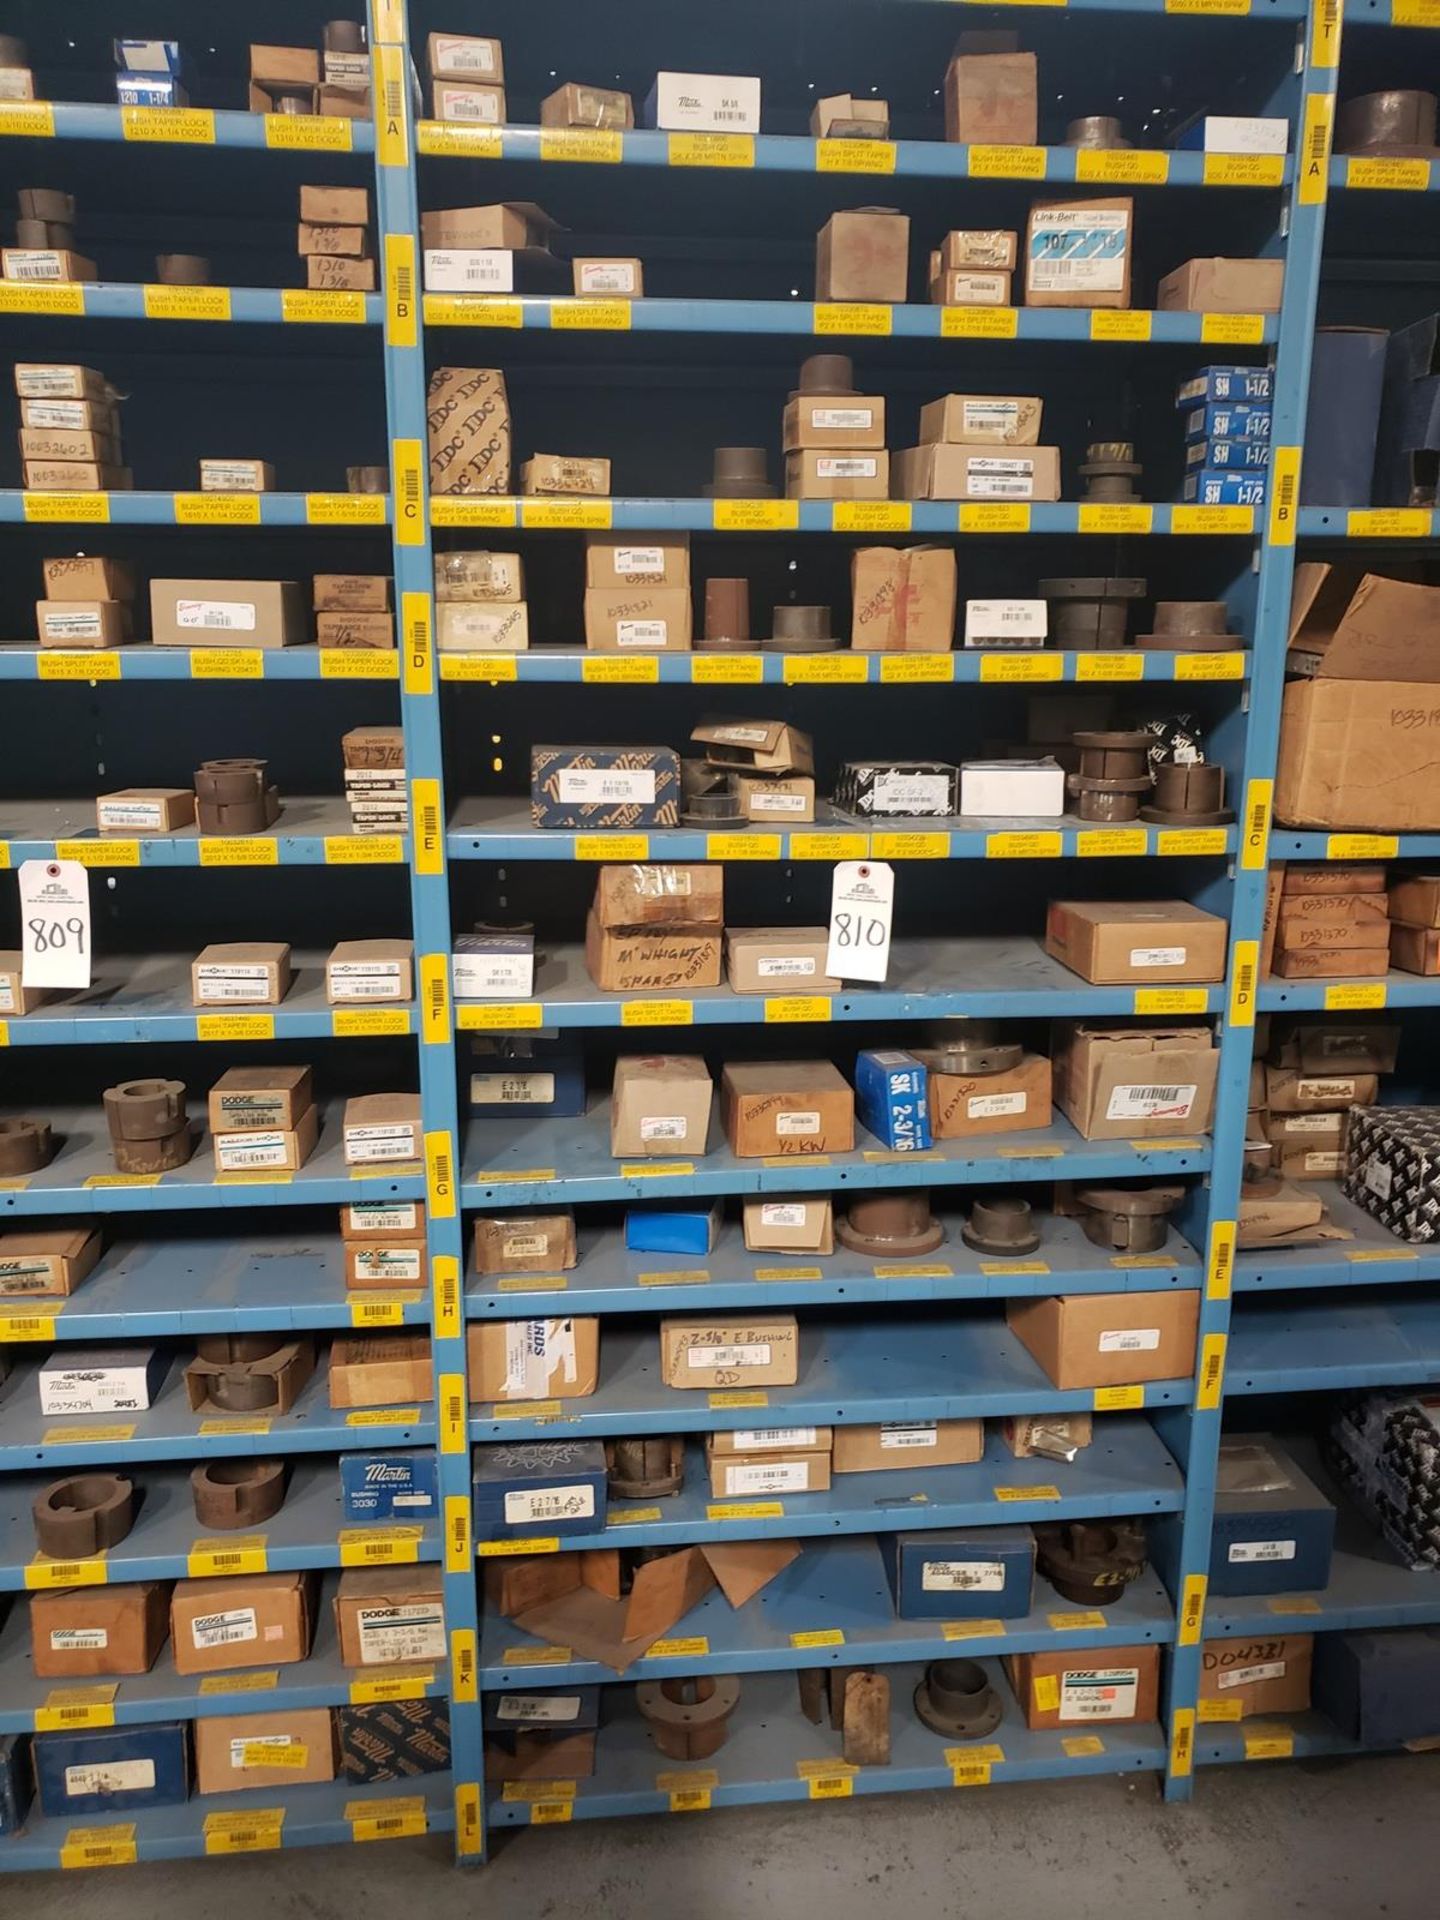 Contents of Storage Shelf Section, Spare Parts | Rig Fee $185